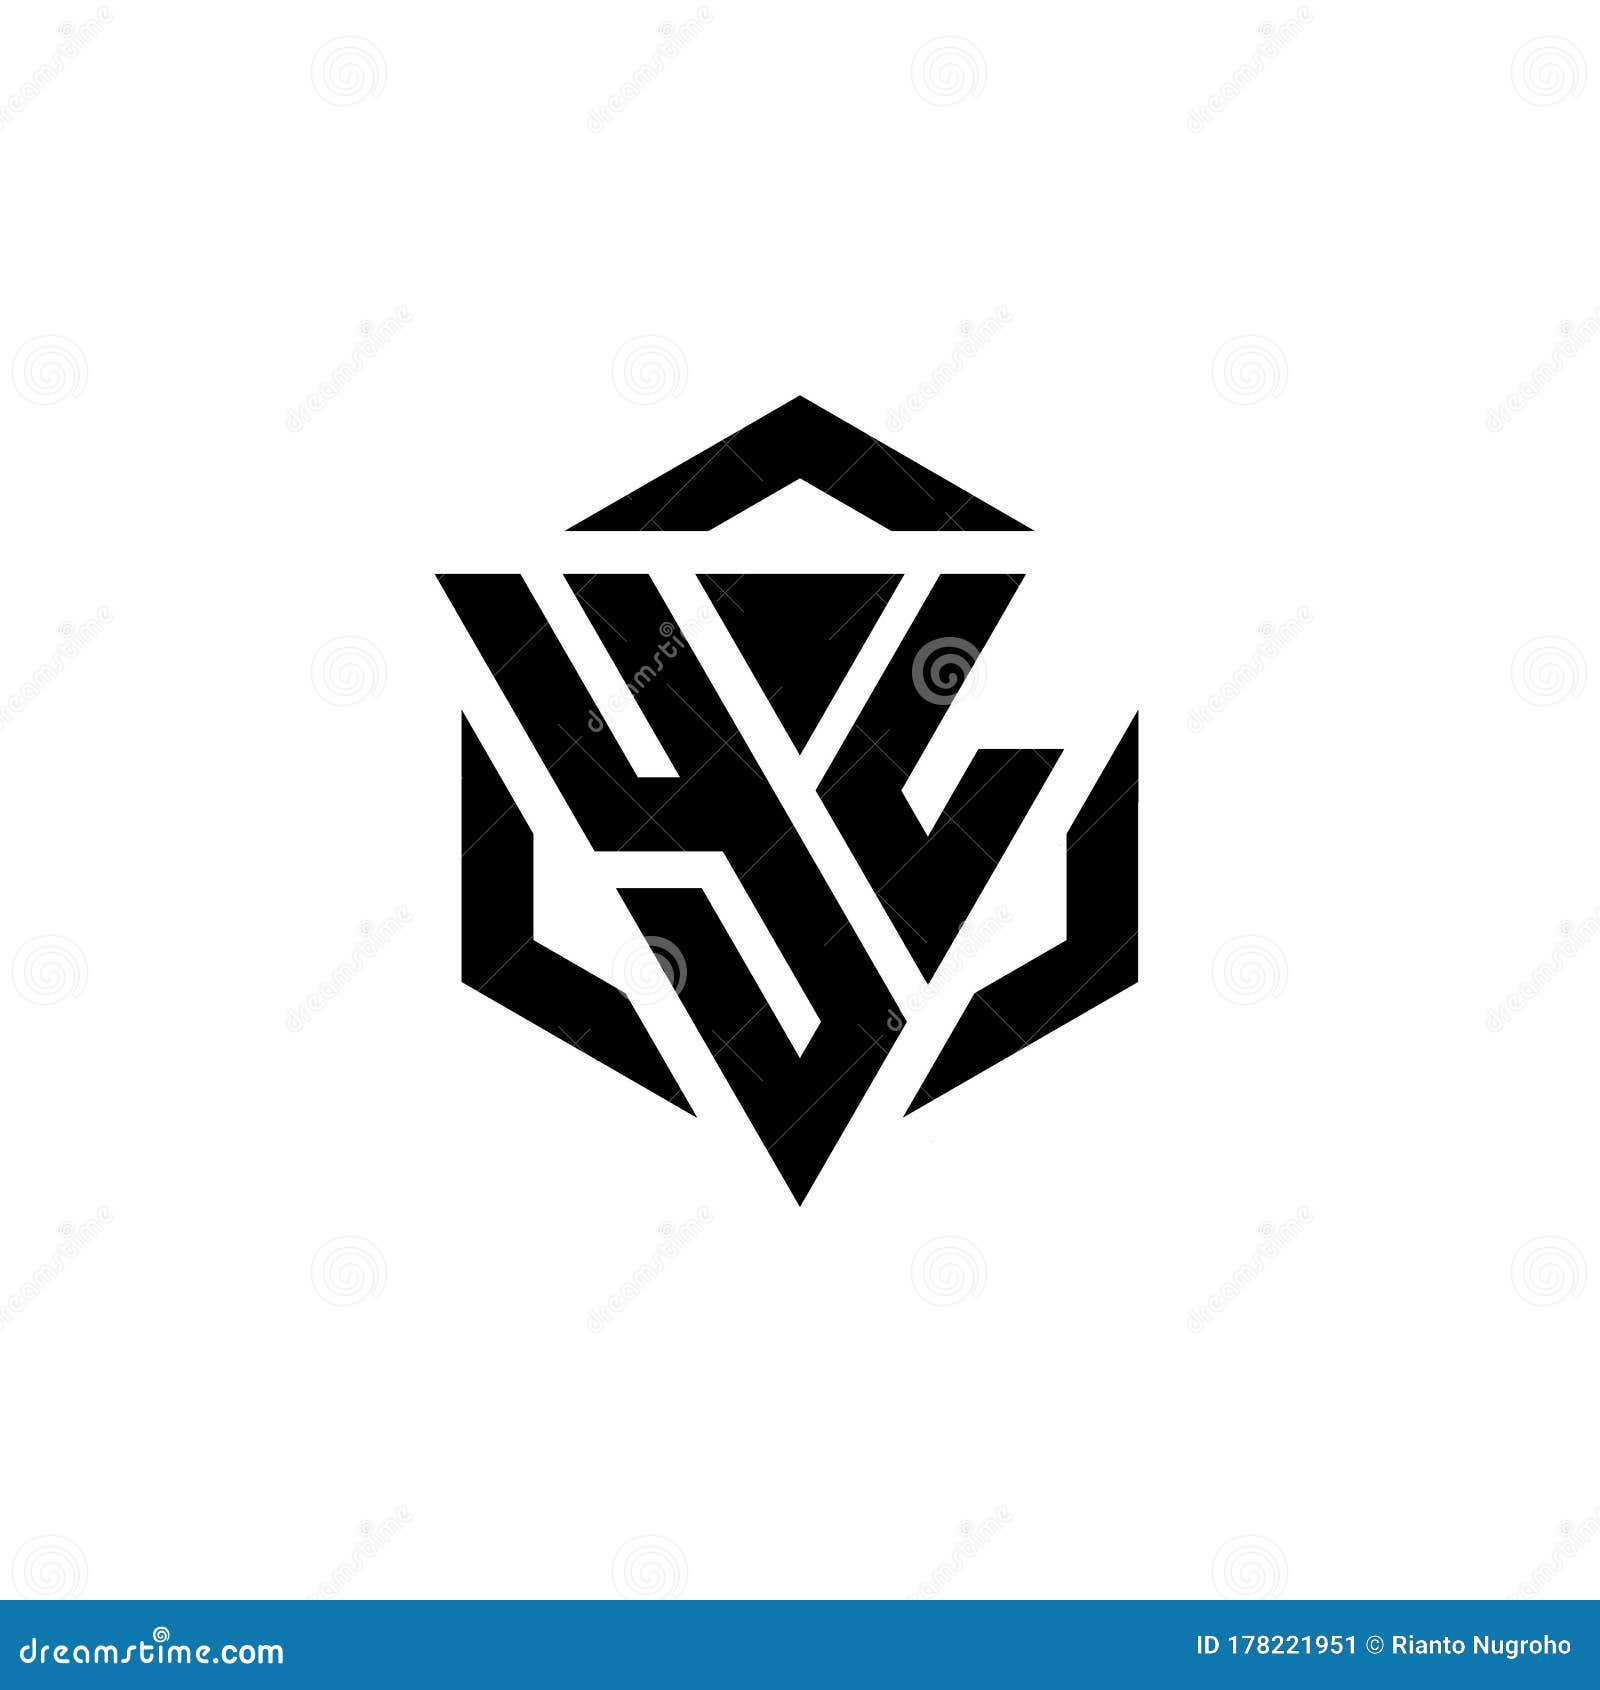 Monogram yl logo with geometric shield and crown Vector Image